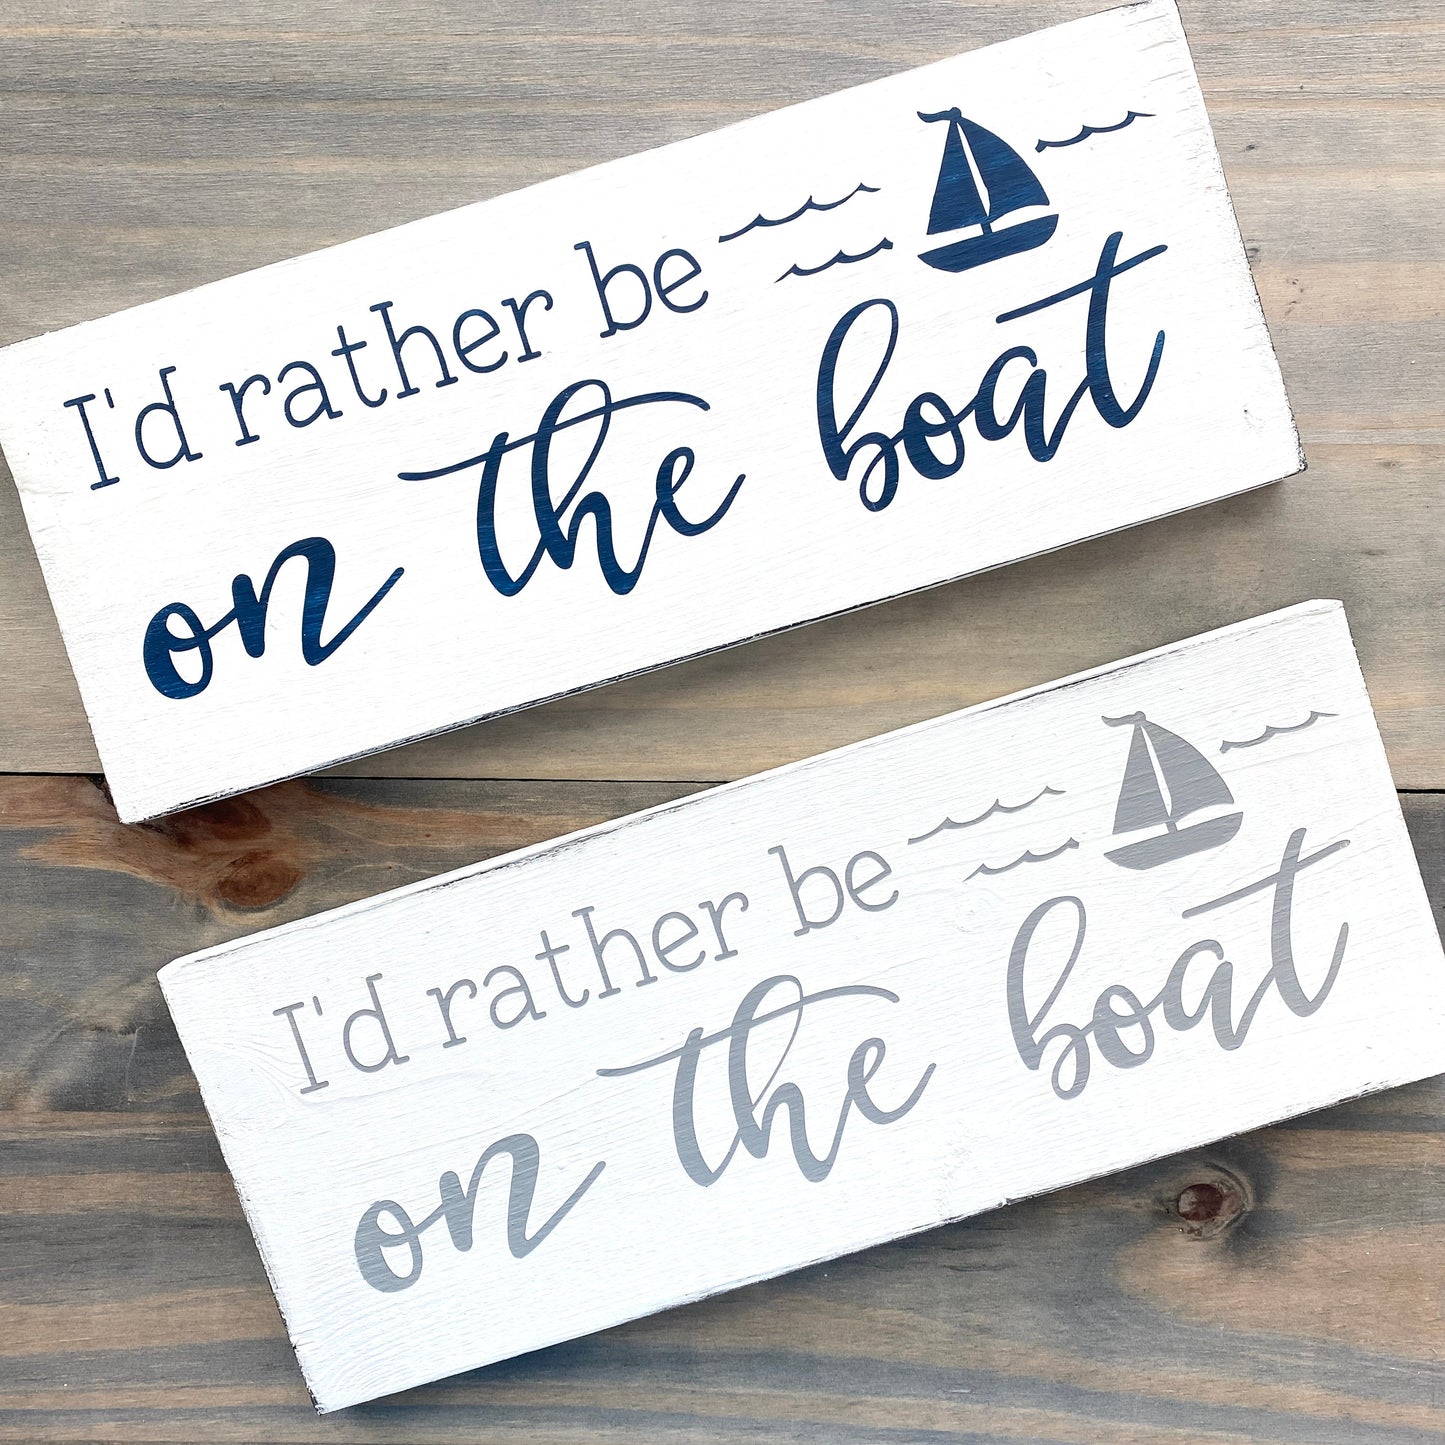 I'd Rather Be on the boat Sign